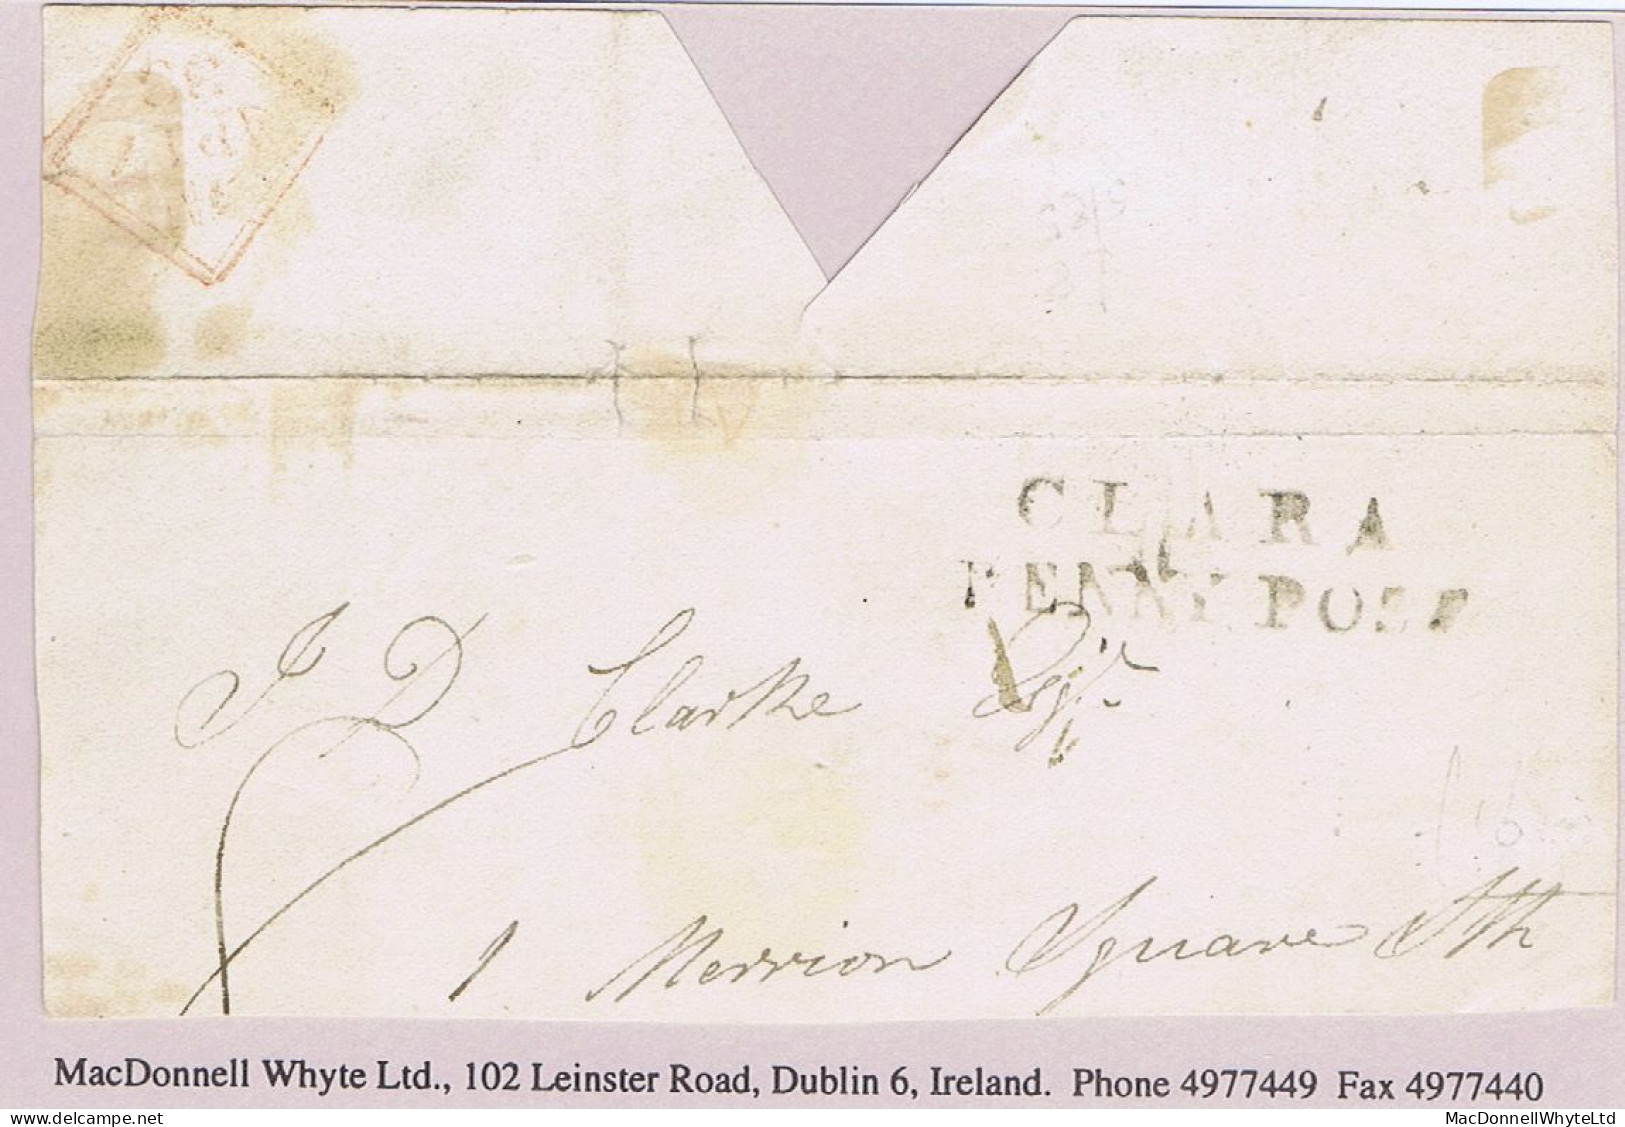 Ireland Offaly 1833 Large Piece To Dublin At "8" With CLARA/PENNY POST (posted At Ballycumber RH) - Prephilately